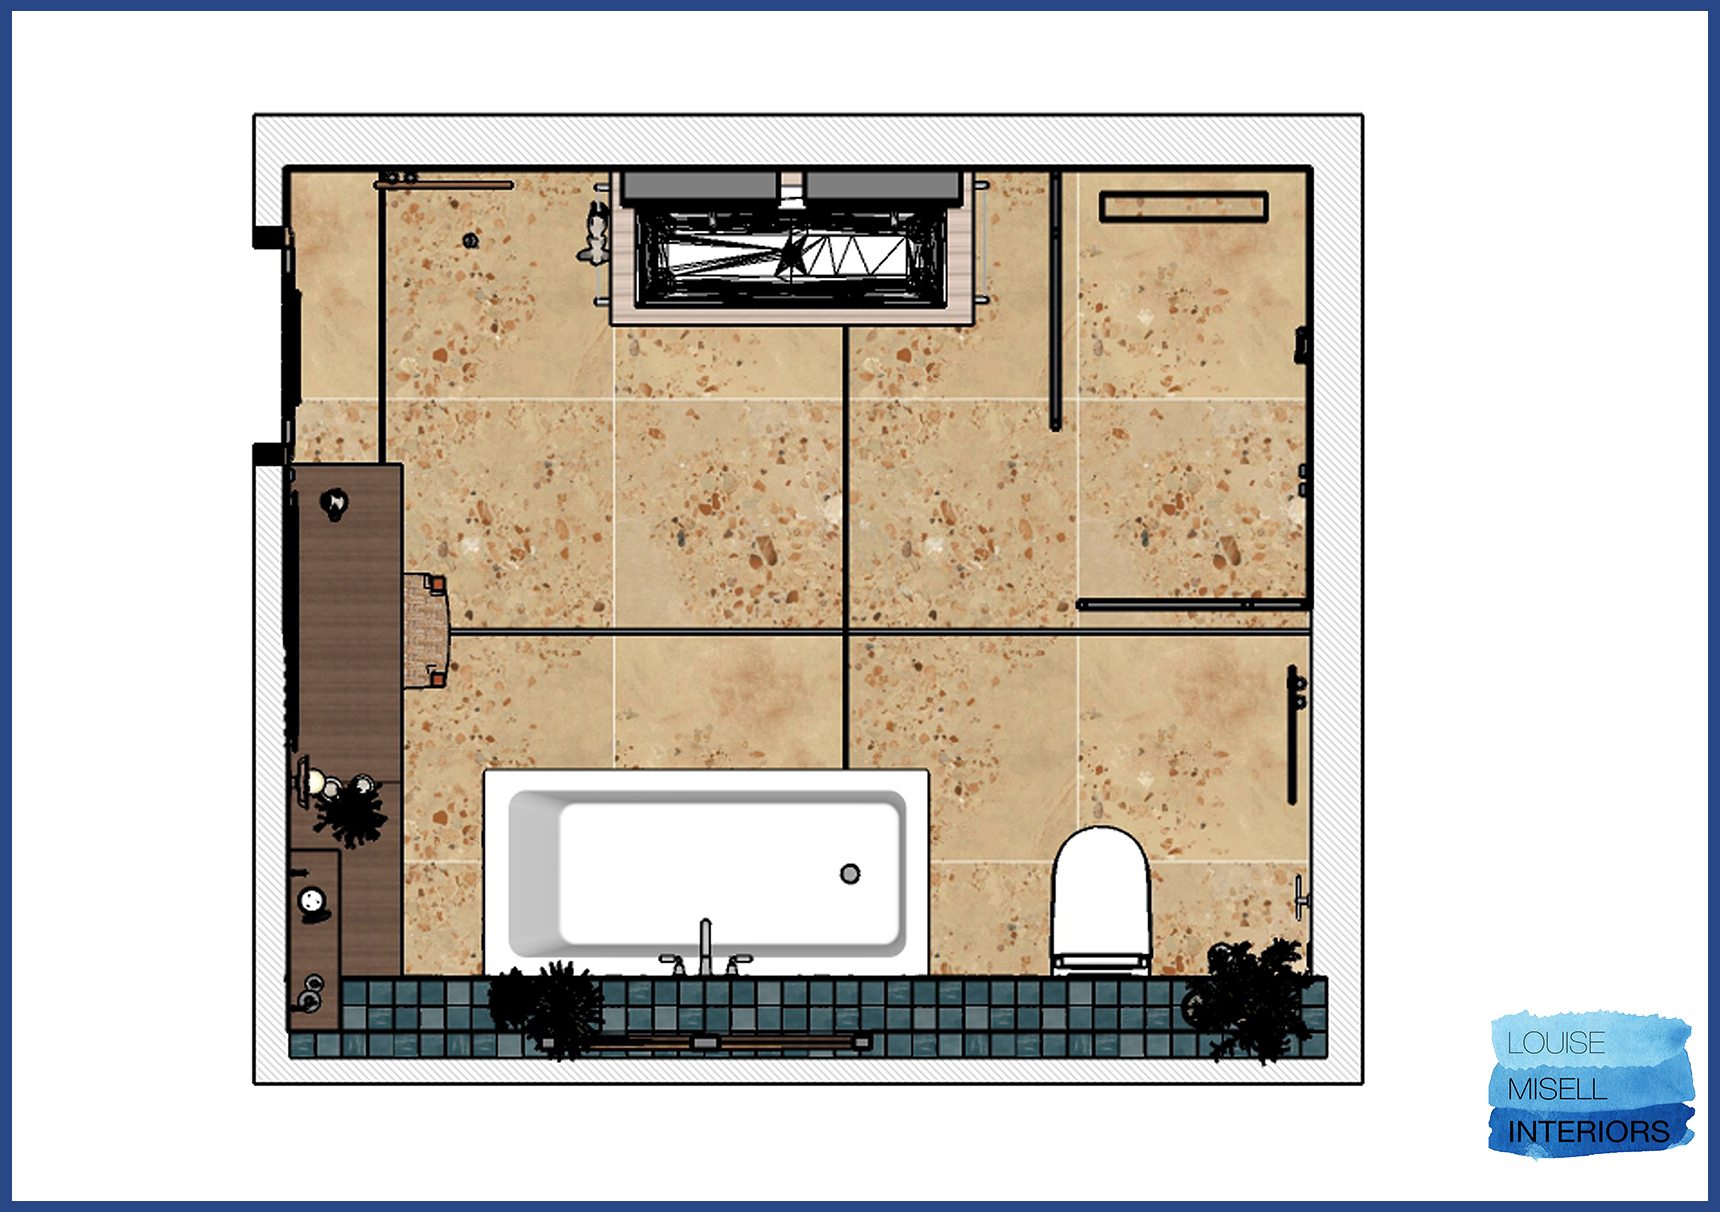 A proposed floor plan for a bathroom 